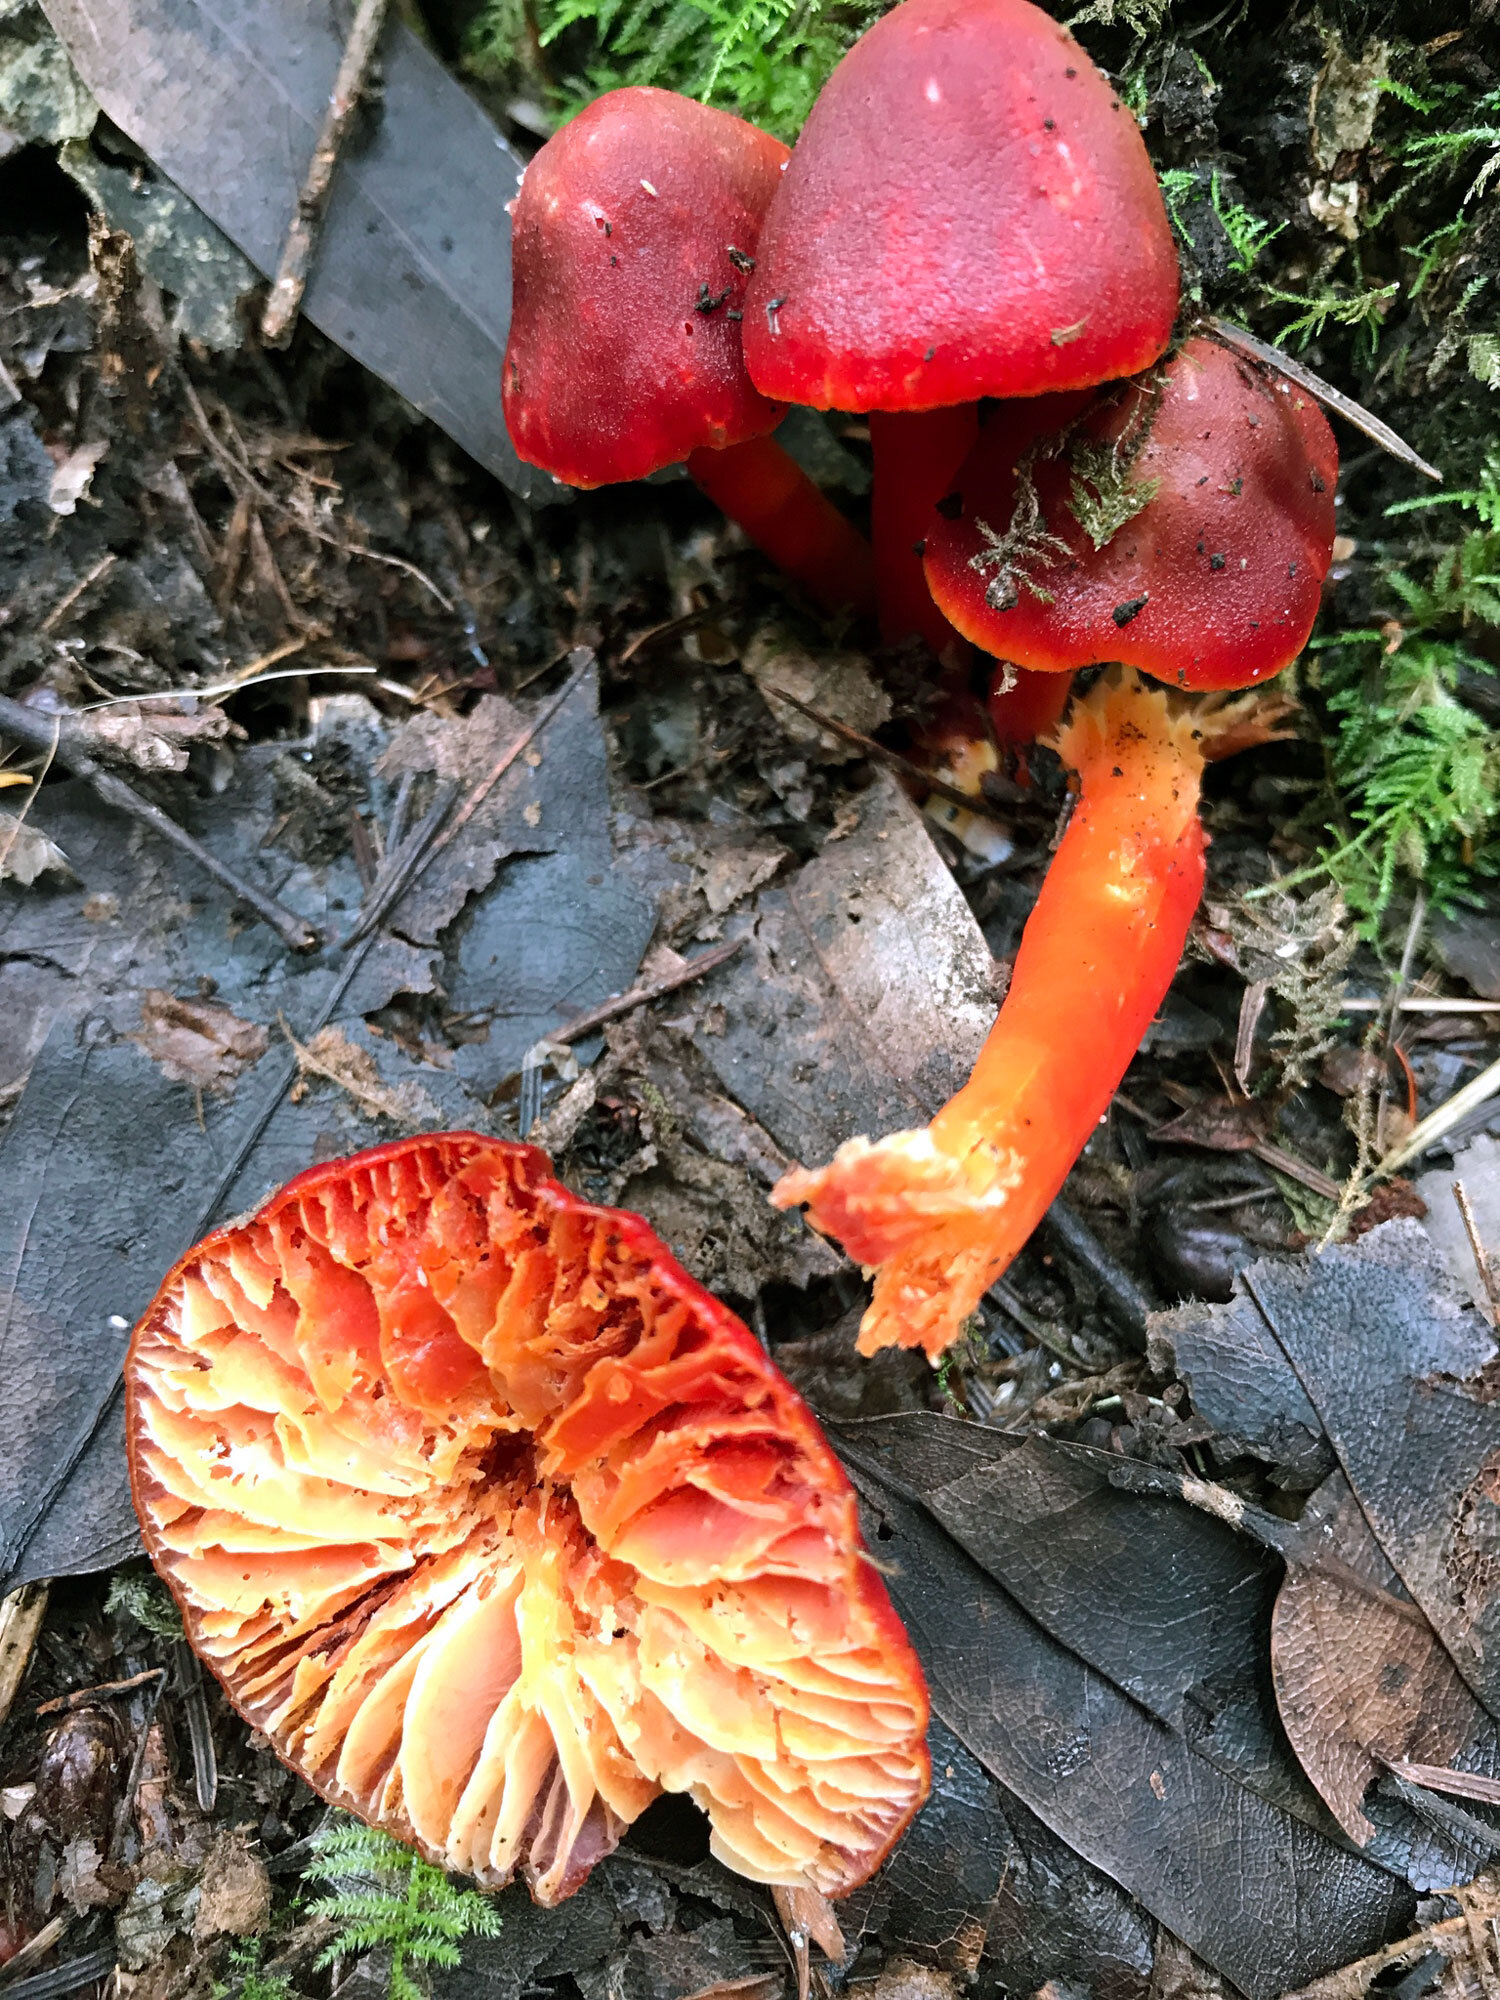 Scarlet Waxy Cap (Hygrocybe coccinea)